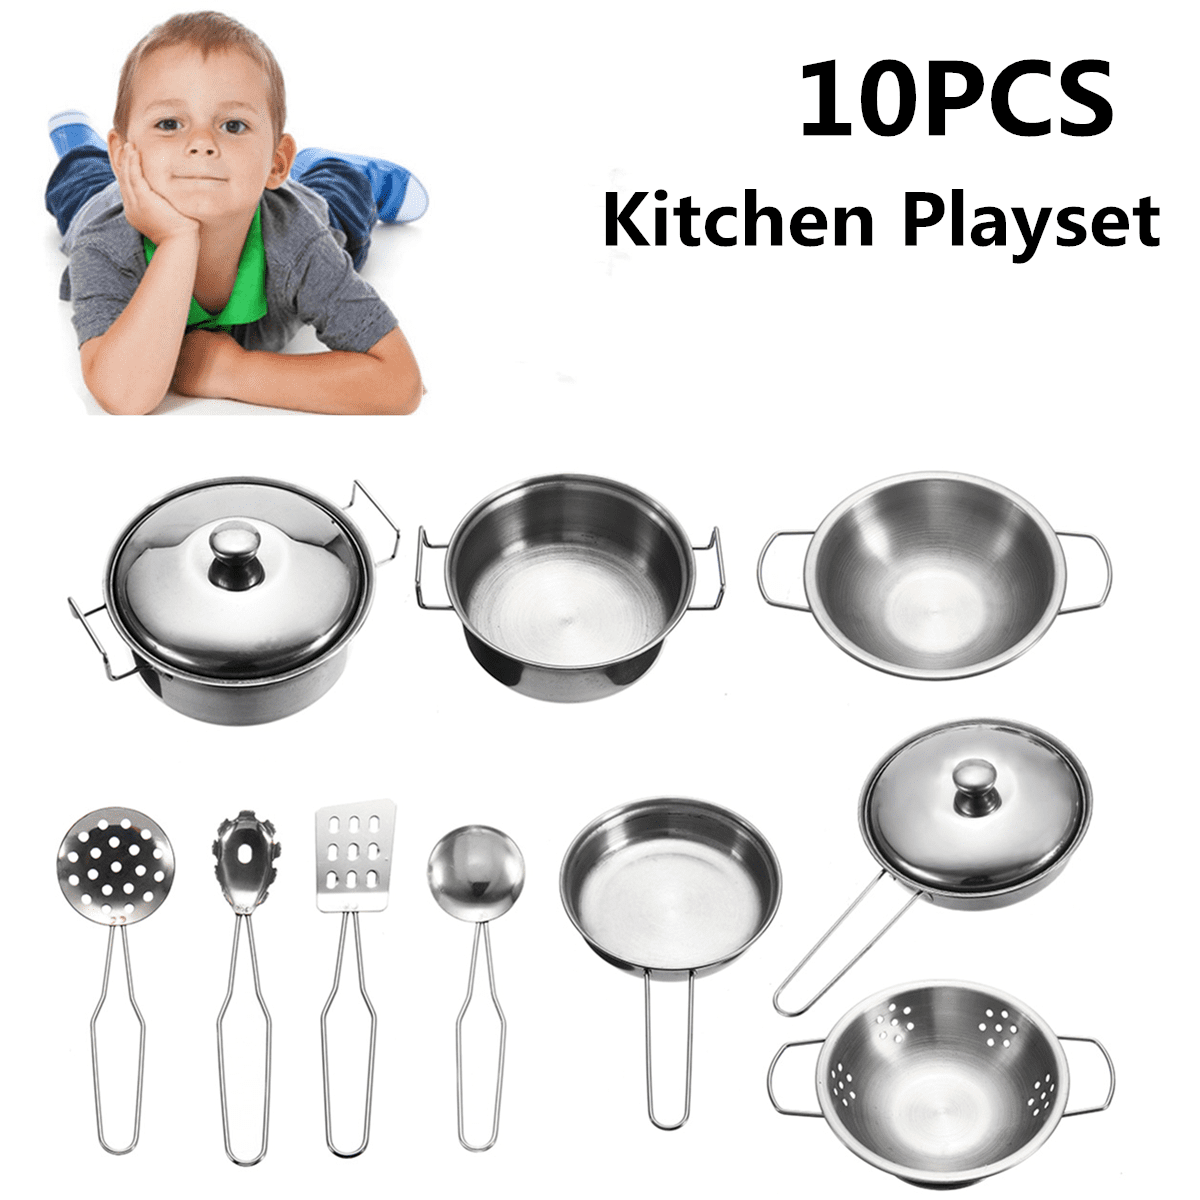 Kids Play House Kitchen Toys Cookware Cooking Utensils Pots Pans Gift 